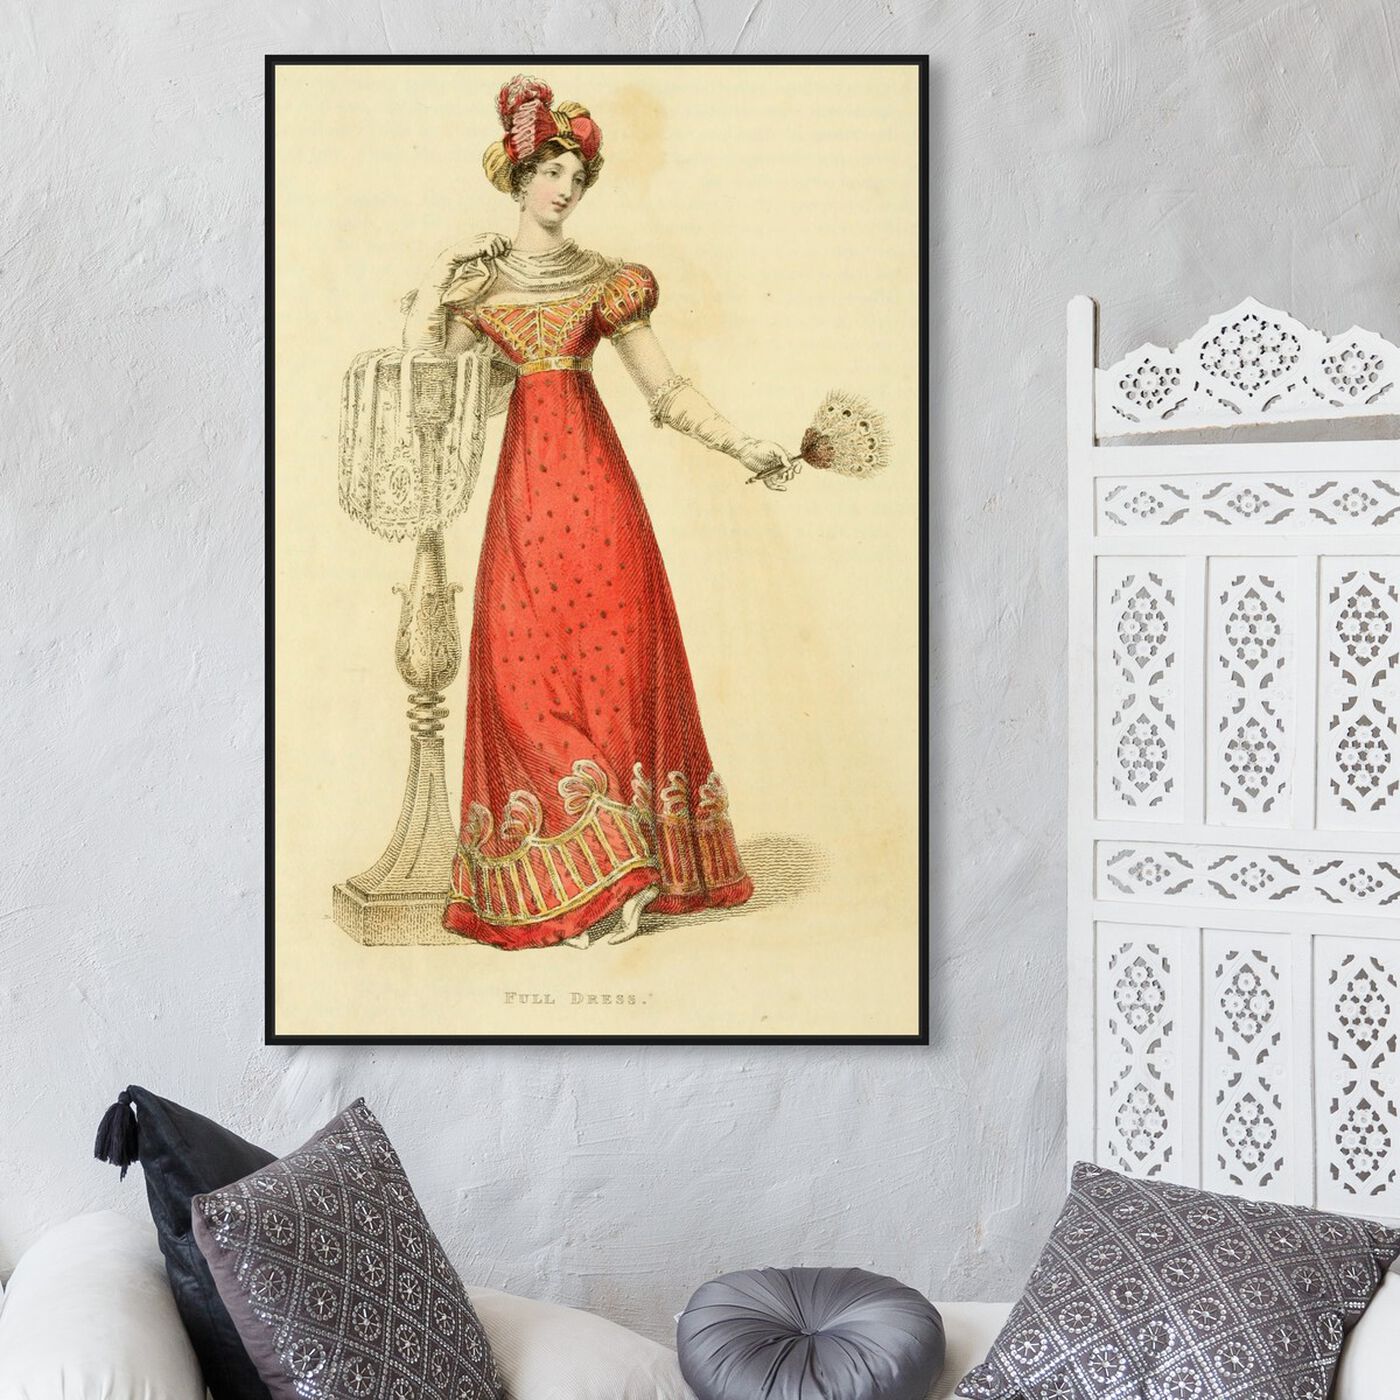 Hanging view of Full Dress - The Art Cabinet featuring classic and figurative and french décor art.